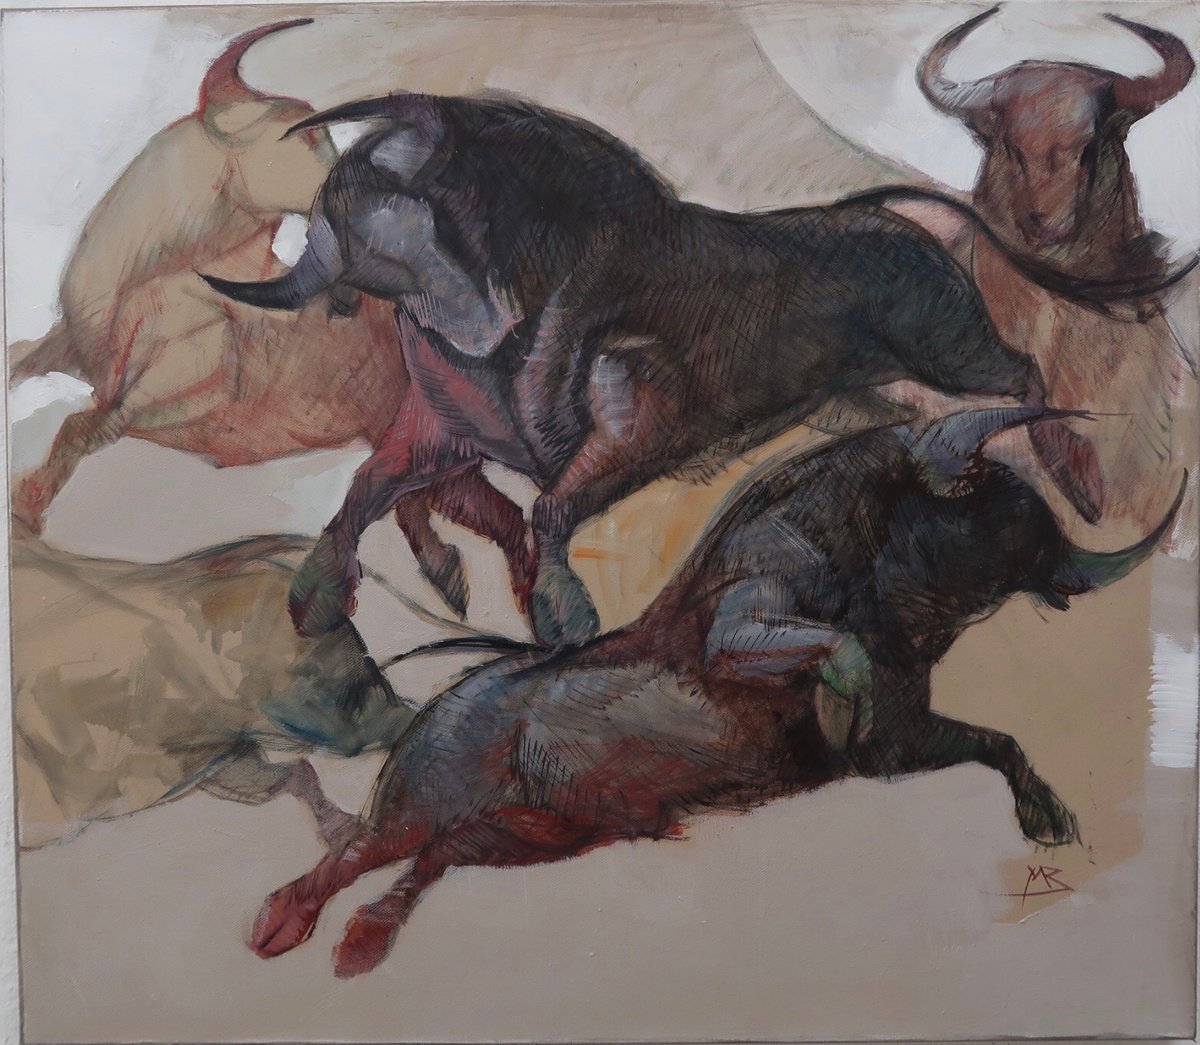 The Dance of the Bulls 1 by Milan Balti?